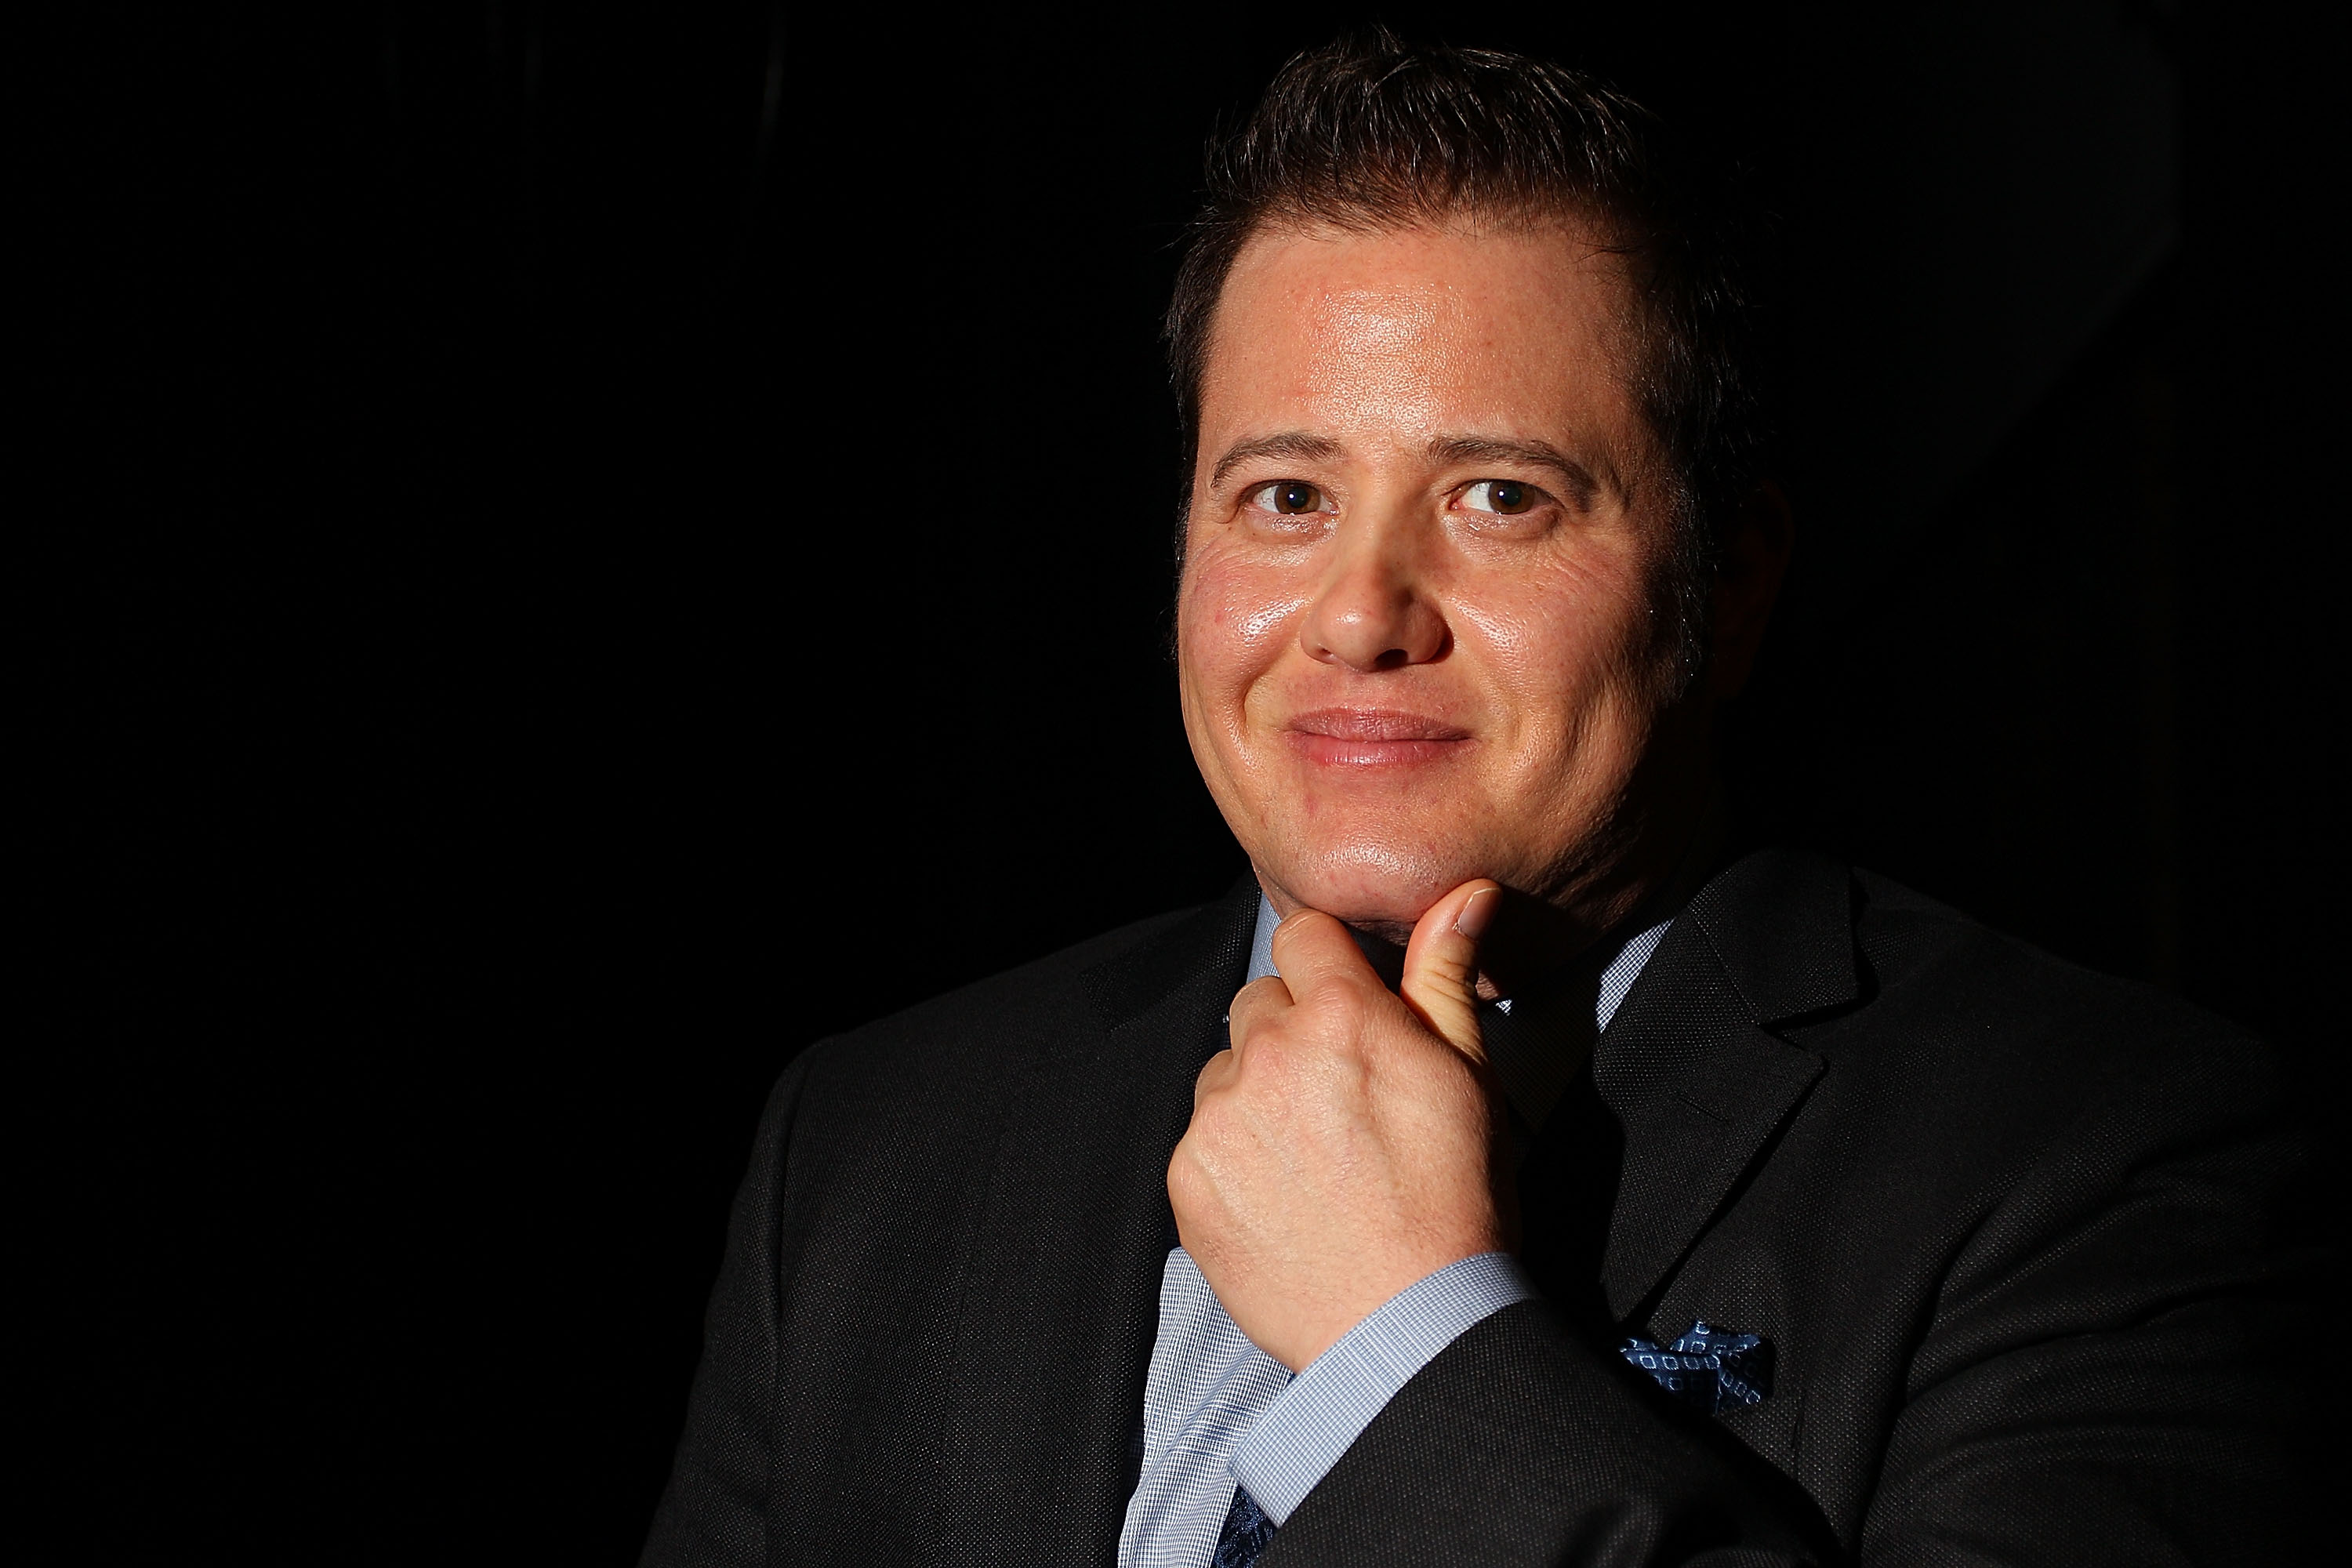 Chaz Bono poses backstage prior to speaking with Dr Elizabeth Riley as part of the Sydney Gay & Lesbian Mardi Gras at the Seymour Centre in Sydney, Australia, on February 26, 2014. | Source: Getty Images